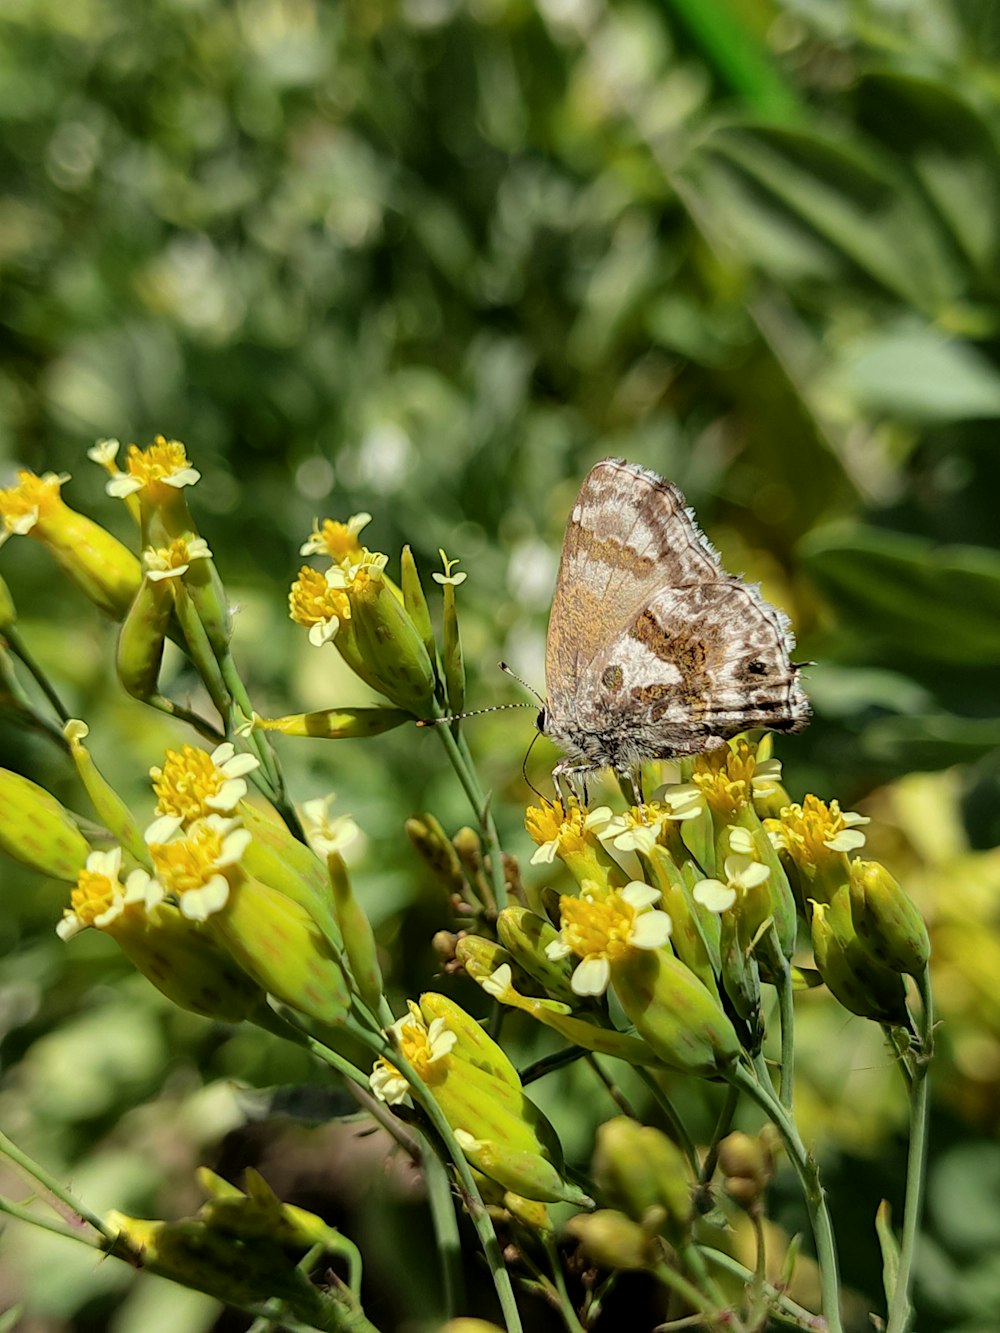 brown and white butterfly perched on yellow flower during daytime